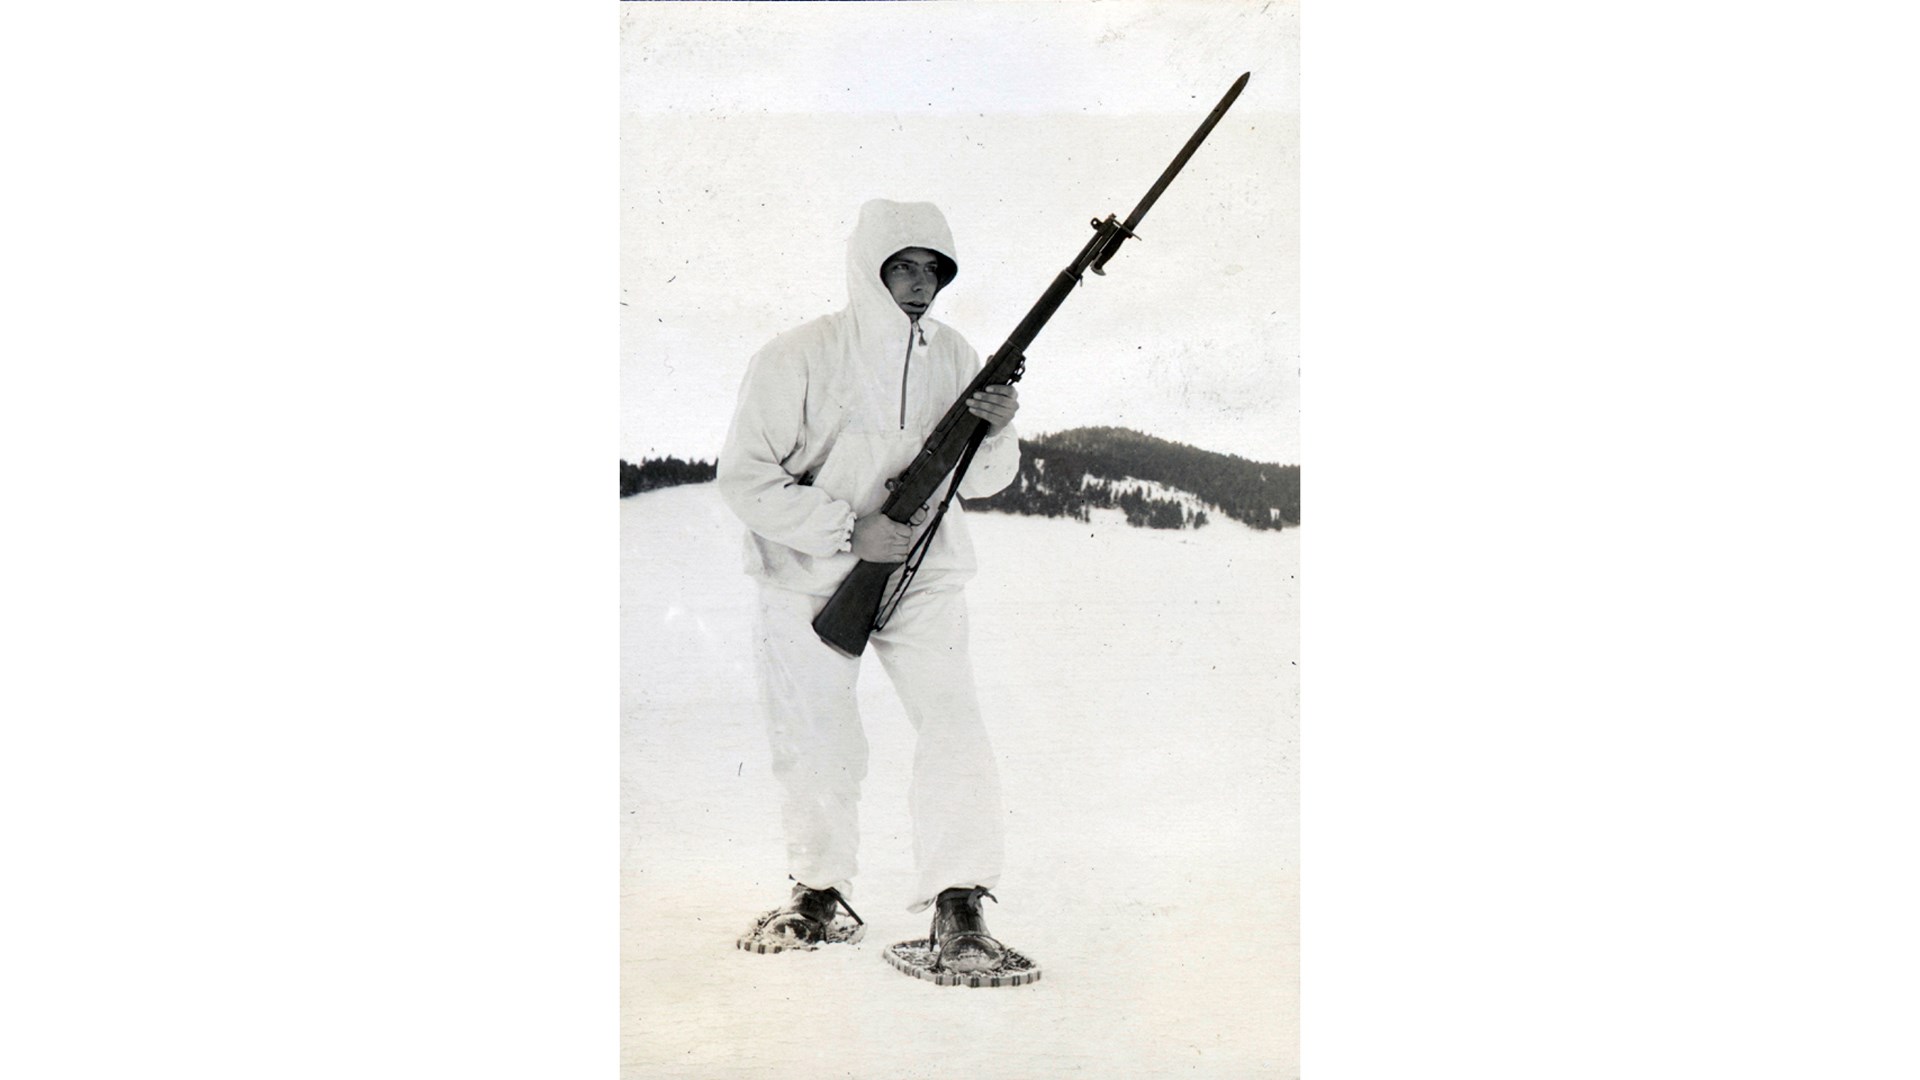 Man wearing white clothing snowshoes holding rifle in the snow mountain background